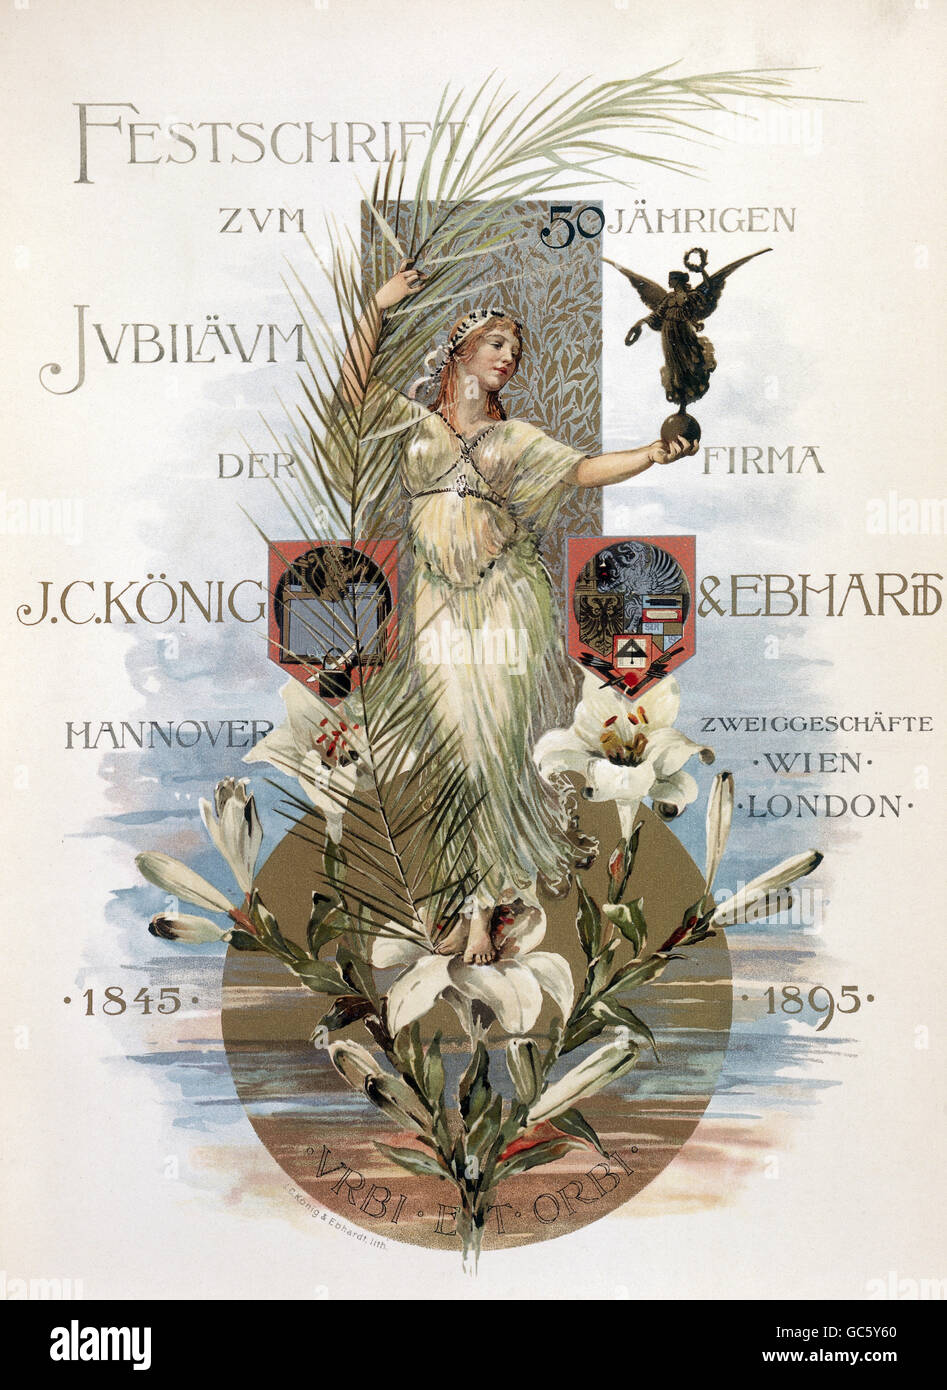 documents, commemorative publication for the 50th anniversary of company, J.C. König und Eberhardt, title, watercolour, 1895, 19th century, historic, historical, document, anniversary, anniversaries, 50 years, fifty years, 50, fifty, allegory, allegoric, goddess, symbol, people, Additional-Rights-Clearences-Not Available Stock Photo